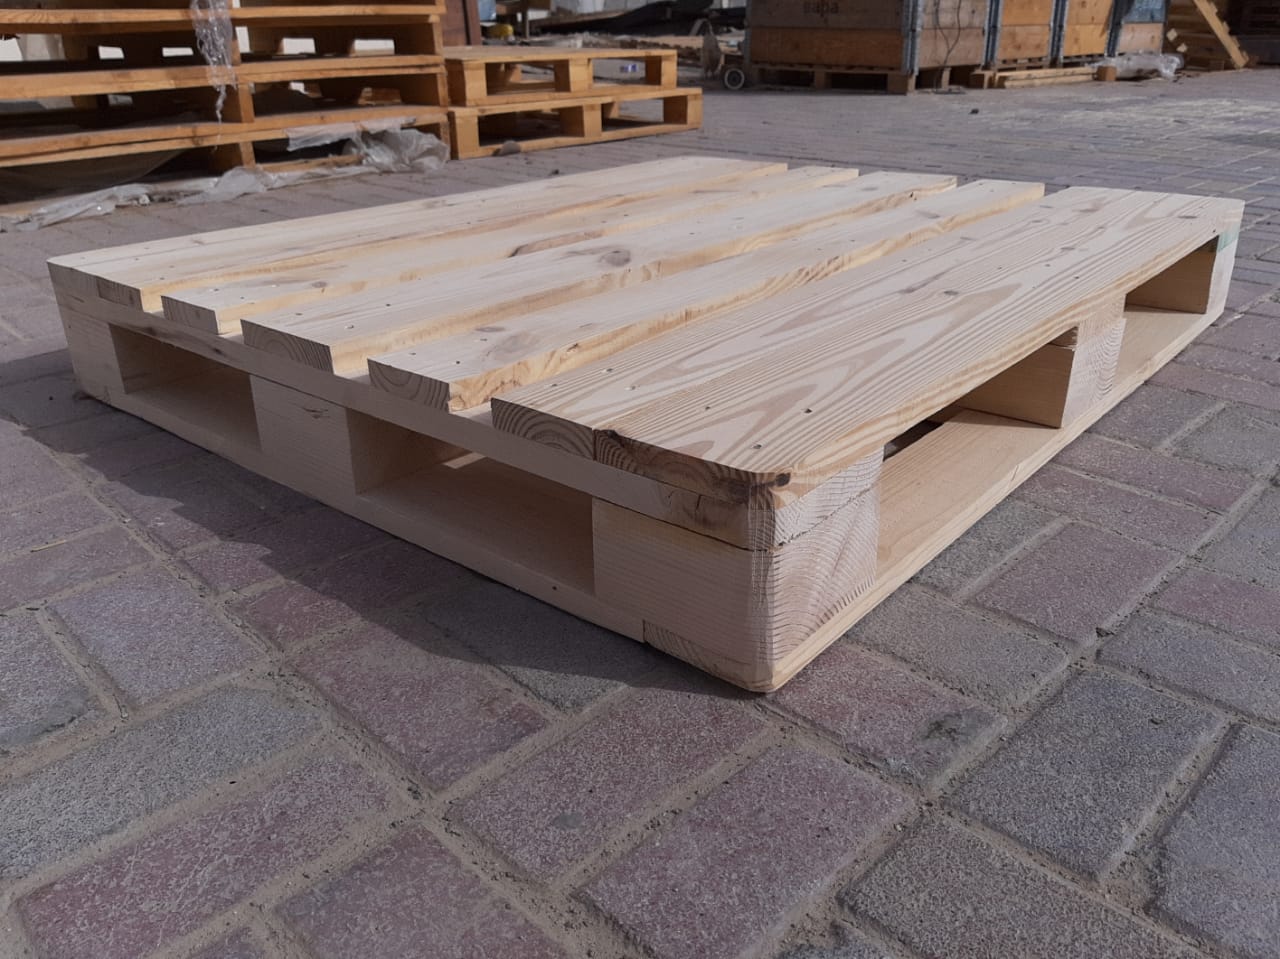 wooden pallet side view